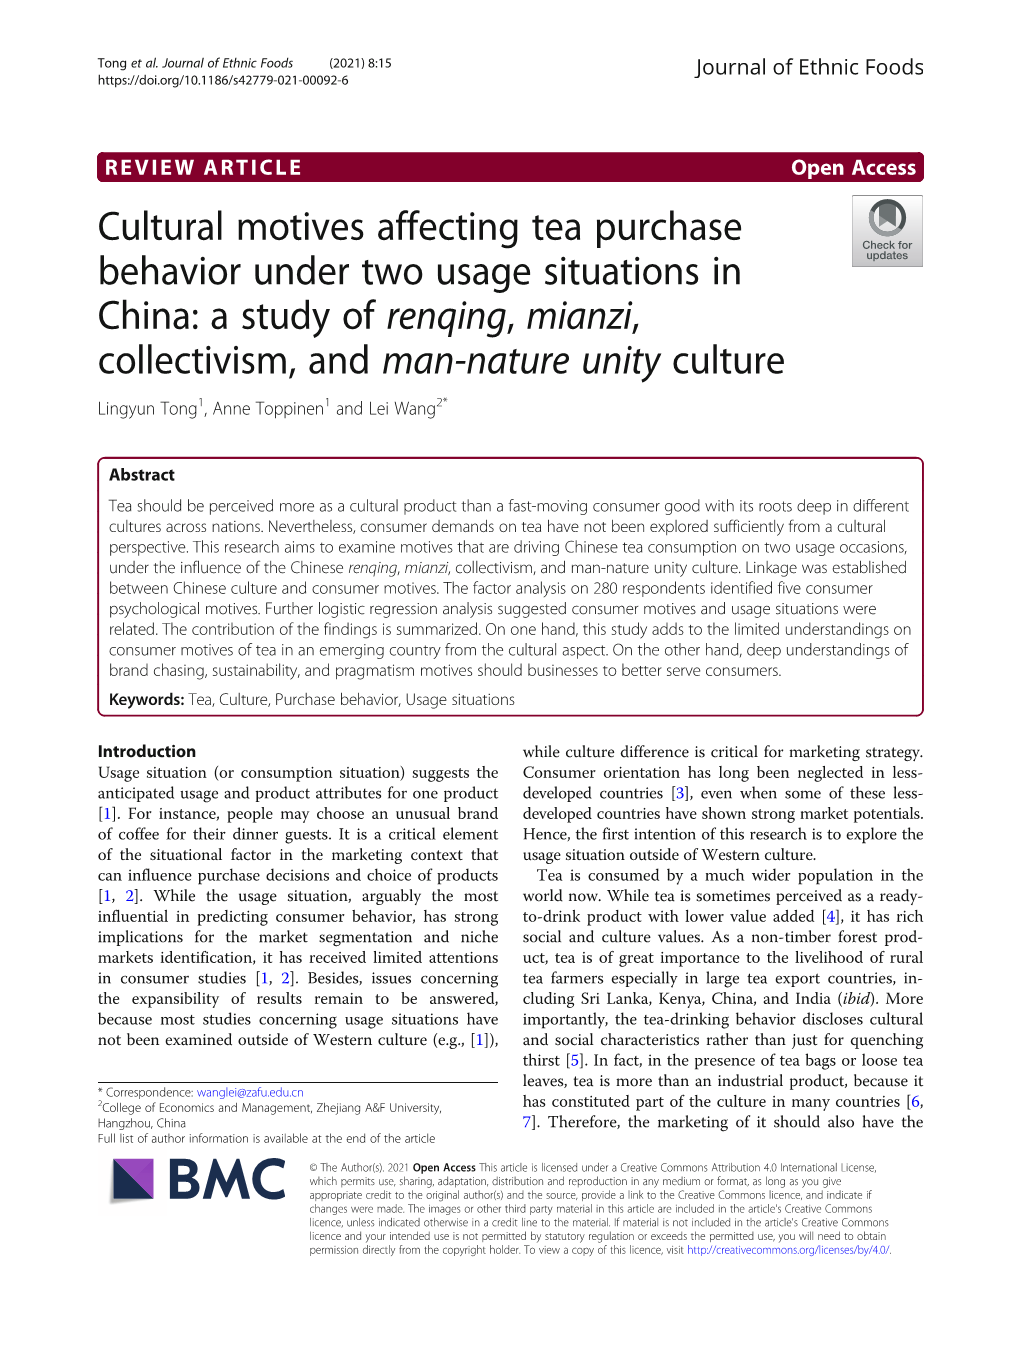 A Study of Renqing, Mianzi, Collectivism, and Man-Nature Unity Culture Lingyun Tong1, Anne Toppinen1 and Lei Wang2*